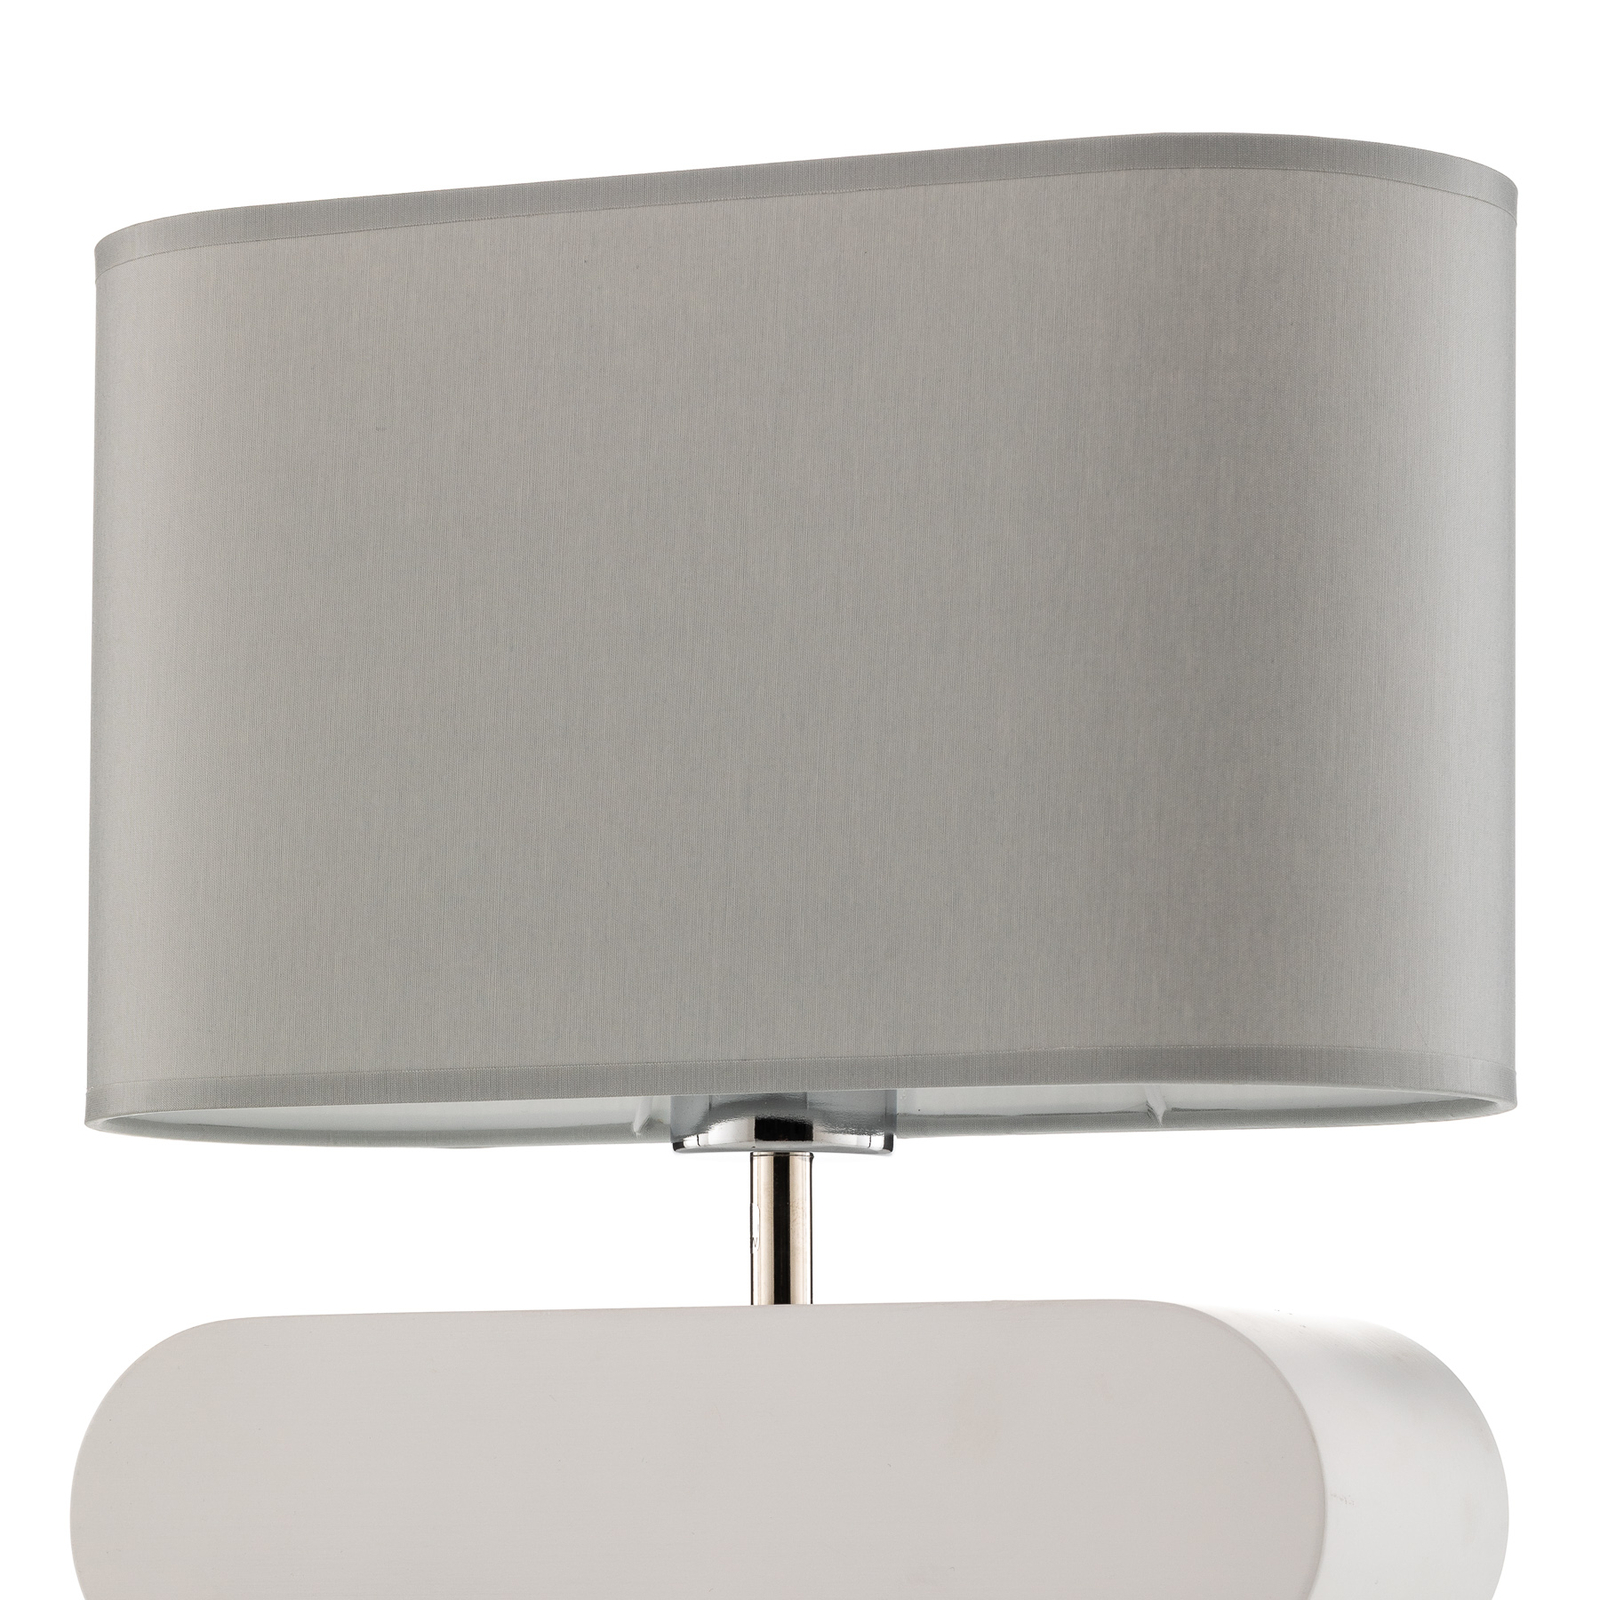 Cassy table lamp, white base grey fabric lampshade